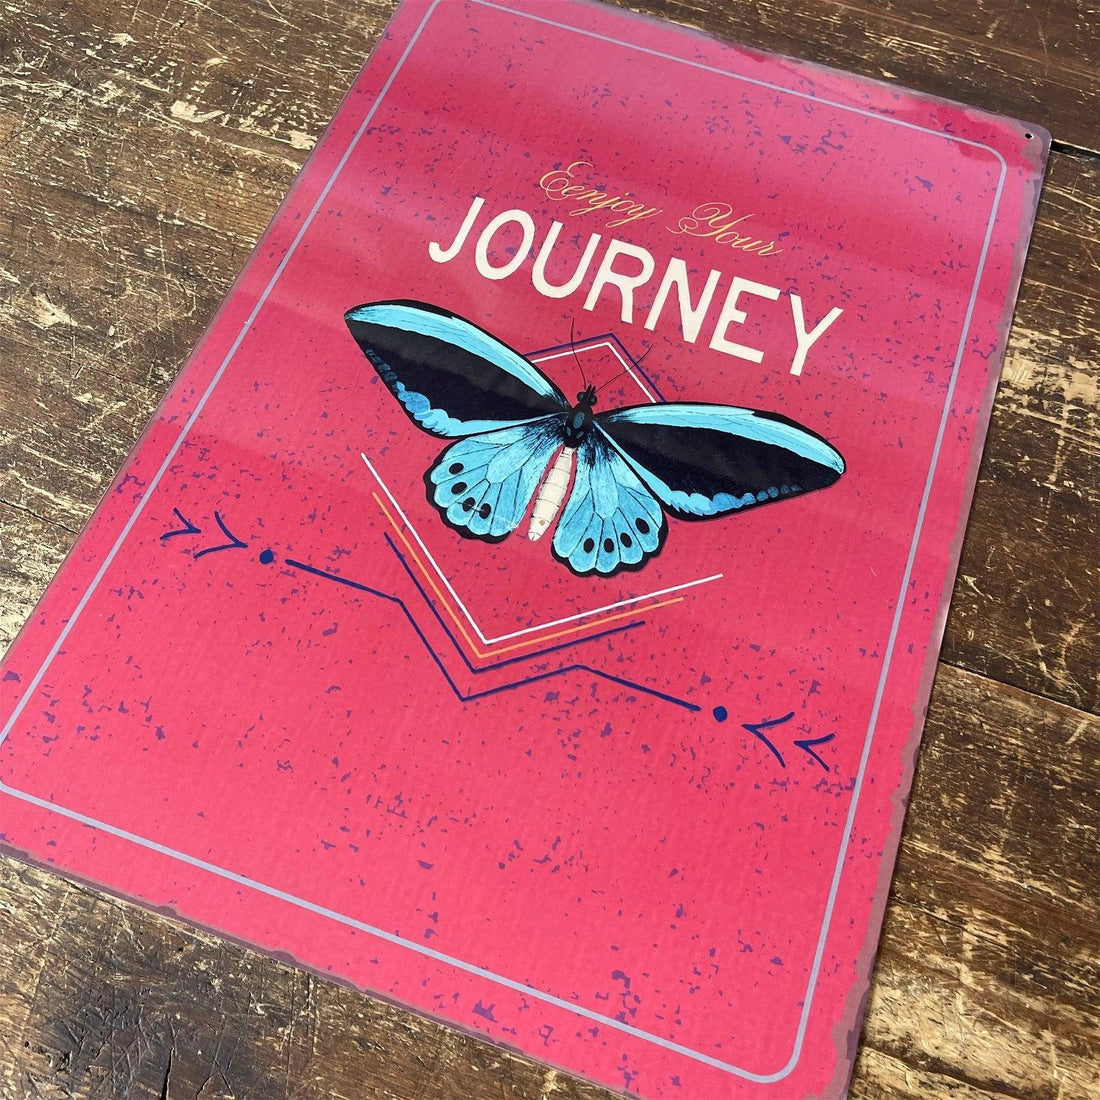 Vintage Metal Sign - Enjoy Your Journey Butterfly Design - £27.99 - Signs & Rules 